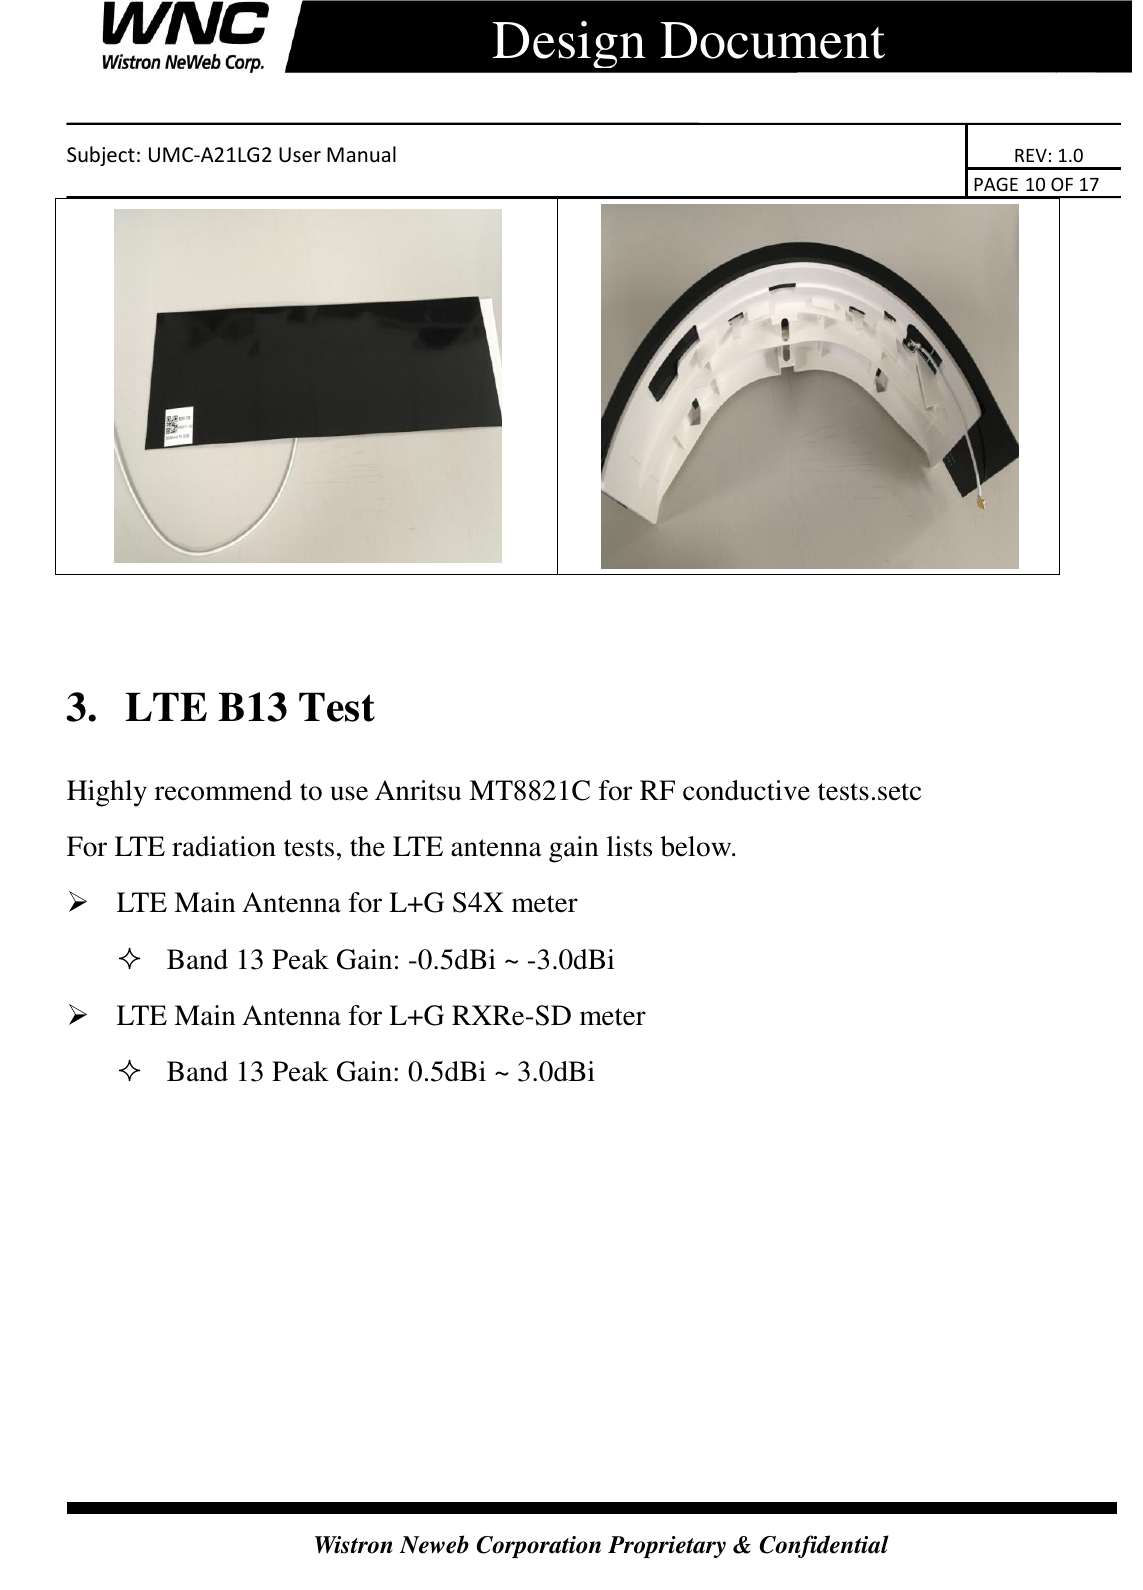    Subject: UMC-A21LG2 User Manual                                                                      REV: 1.0                                                                                        PAGE 10 OF 17  Wistron Neweb Corporation Proprietary &amp; Confidential      Design Document       3.   LTE B13 Test Highly recommend to use Anritsu MT8821C for RF conductive tests.setc For LTE radiation tests, the LTE antenna gain lists below.  LTE Main Antenna for L+G S4X meter  Band 13 Peak Gain: -0.5dBi ~ -3.0dBi  LTE Main Antenna for L+G RXRe-SD meter  Band 13 Peak Gain: 0.5dBi ~ 3.0dBi     